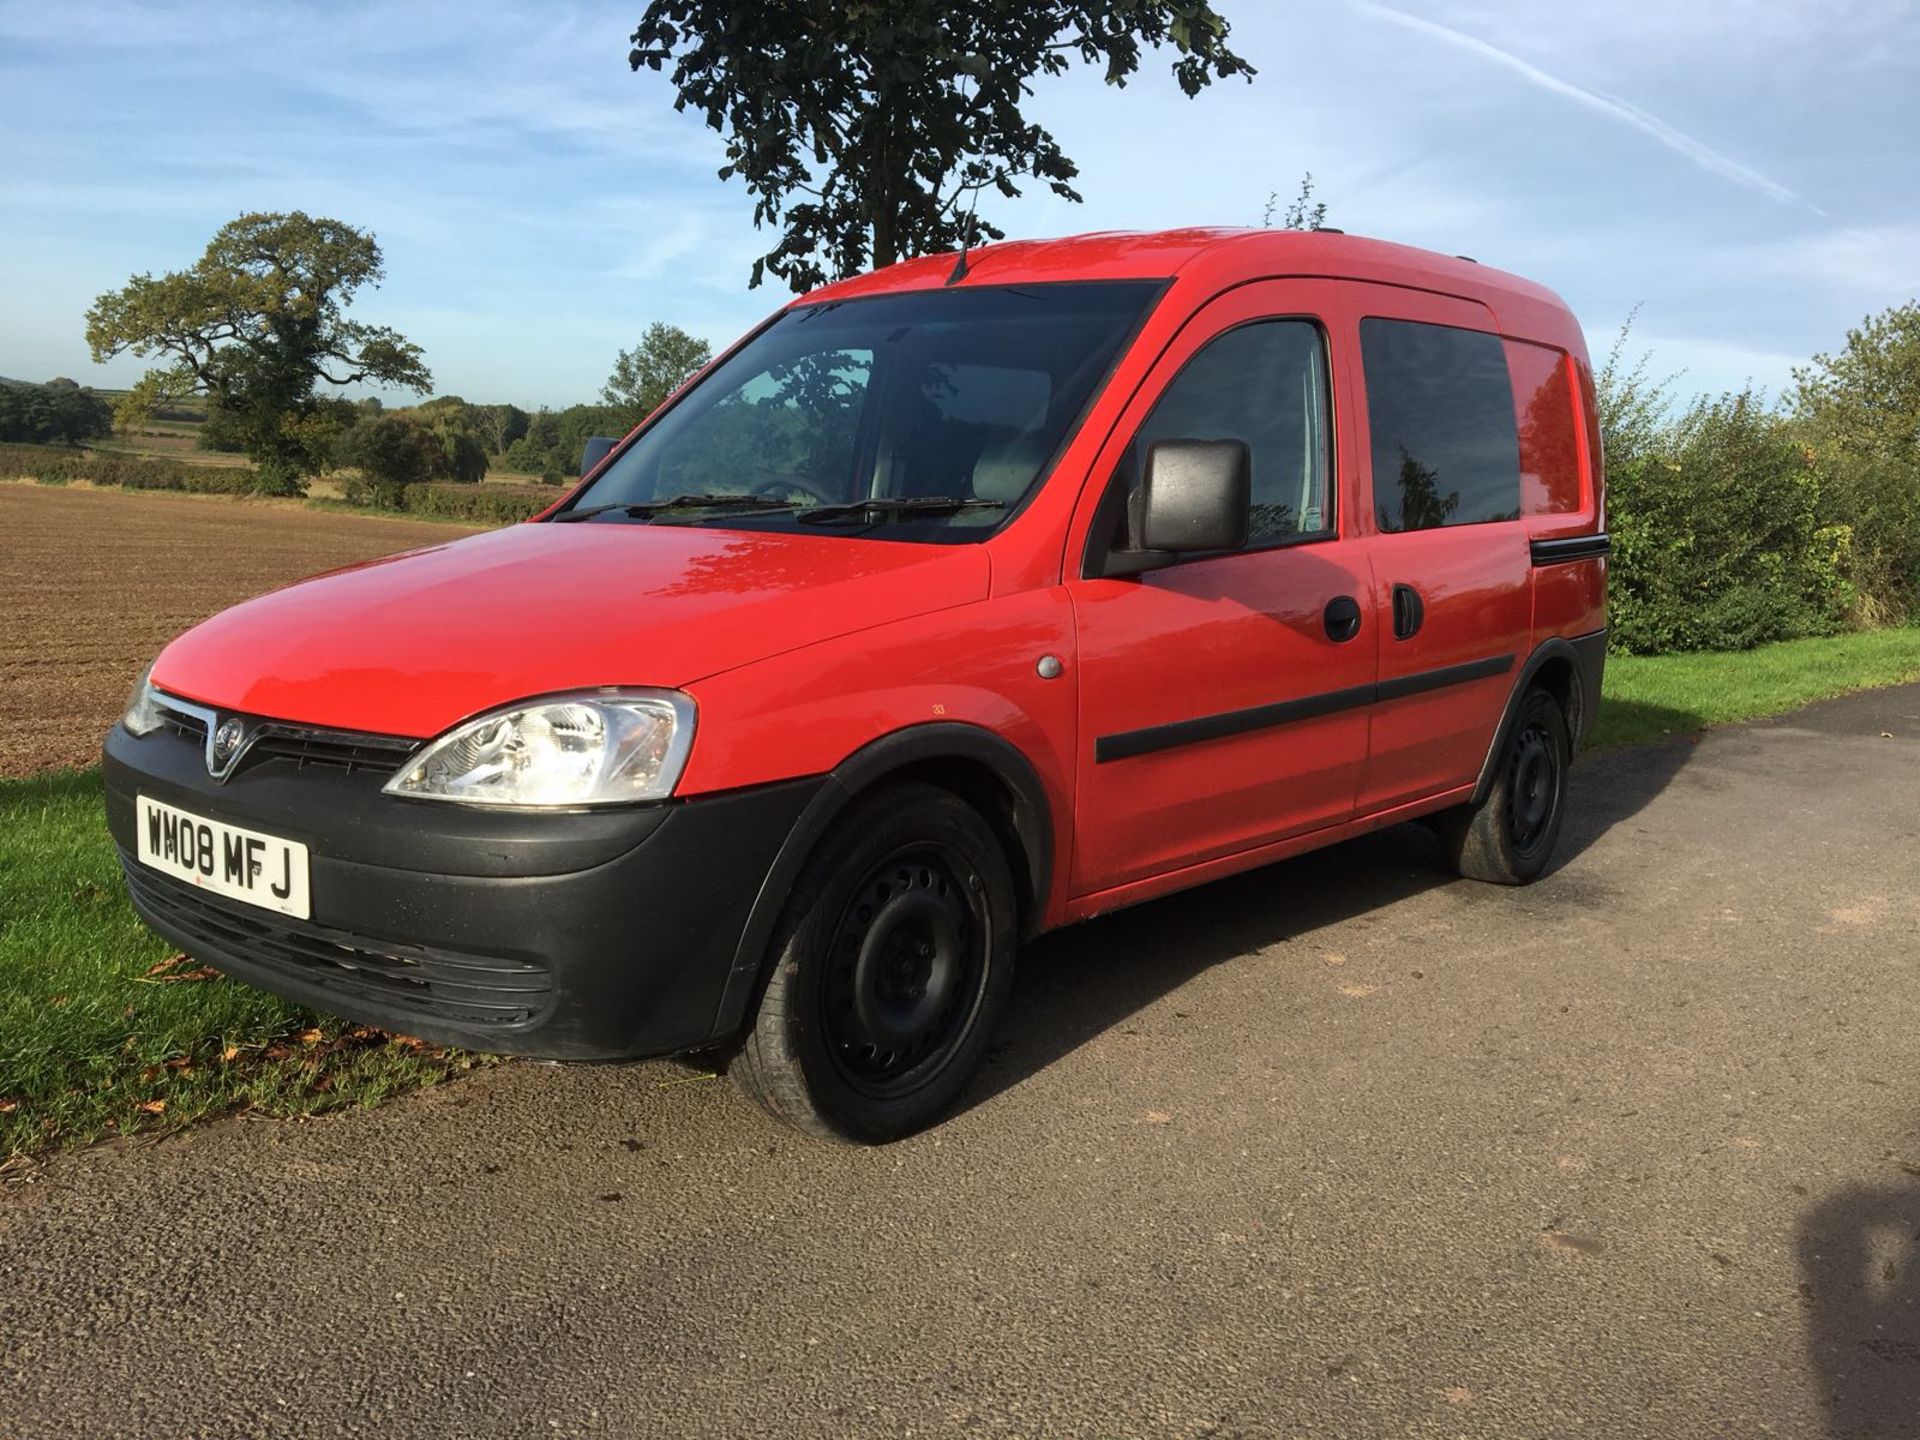 2008/08 REG VAUXHALL COMBO CDTI SWB, 5 SEATER, SHOWING 1 OWNER, ROYAL MAIL *NO VAT* - Image 2 of 11